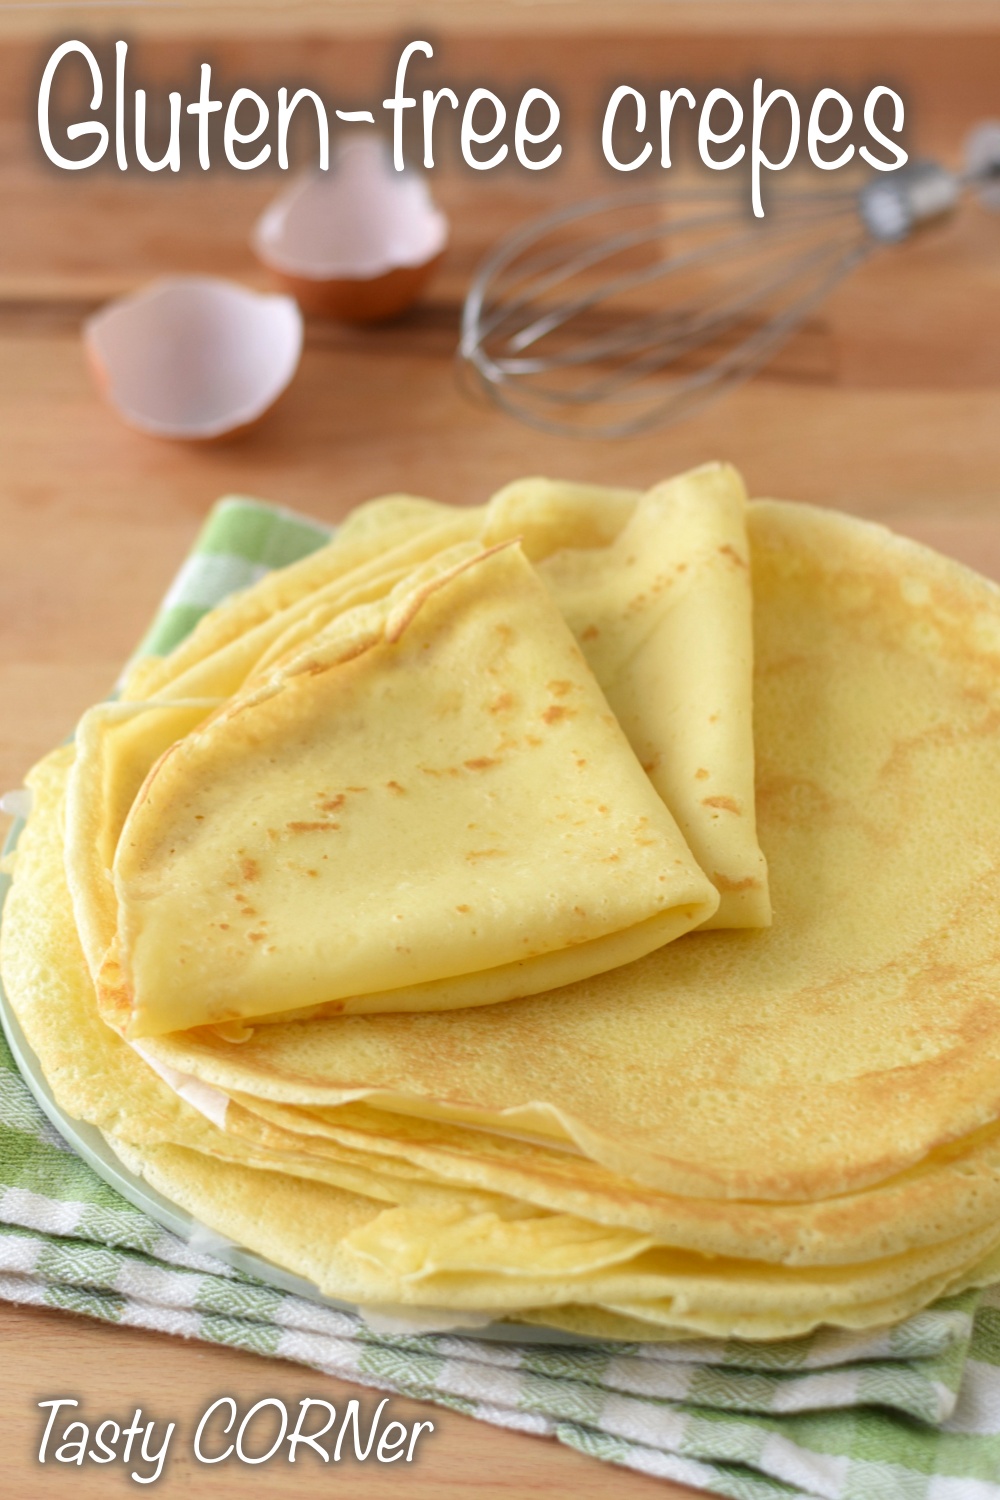 en_v_ easy recipe gluten-free crepes with rice flour dairyfree option sweet and salted by tastycorner